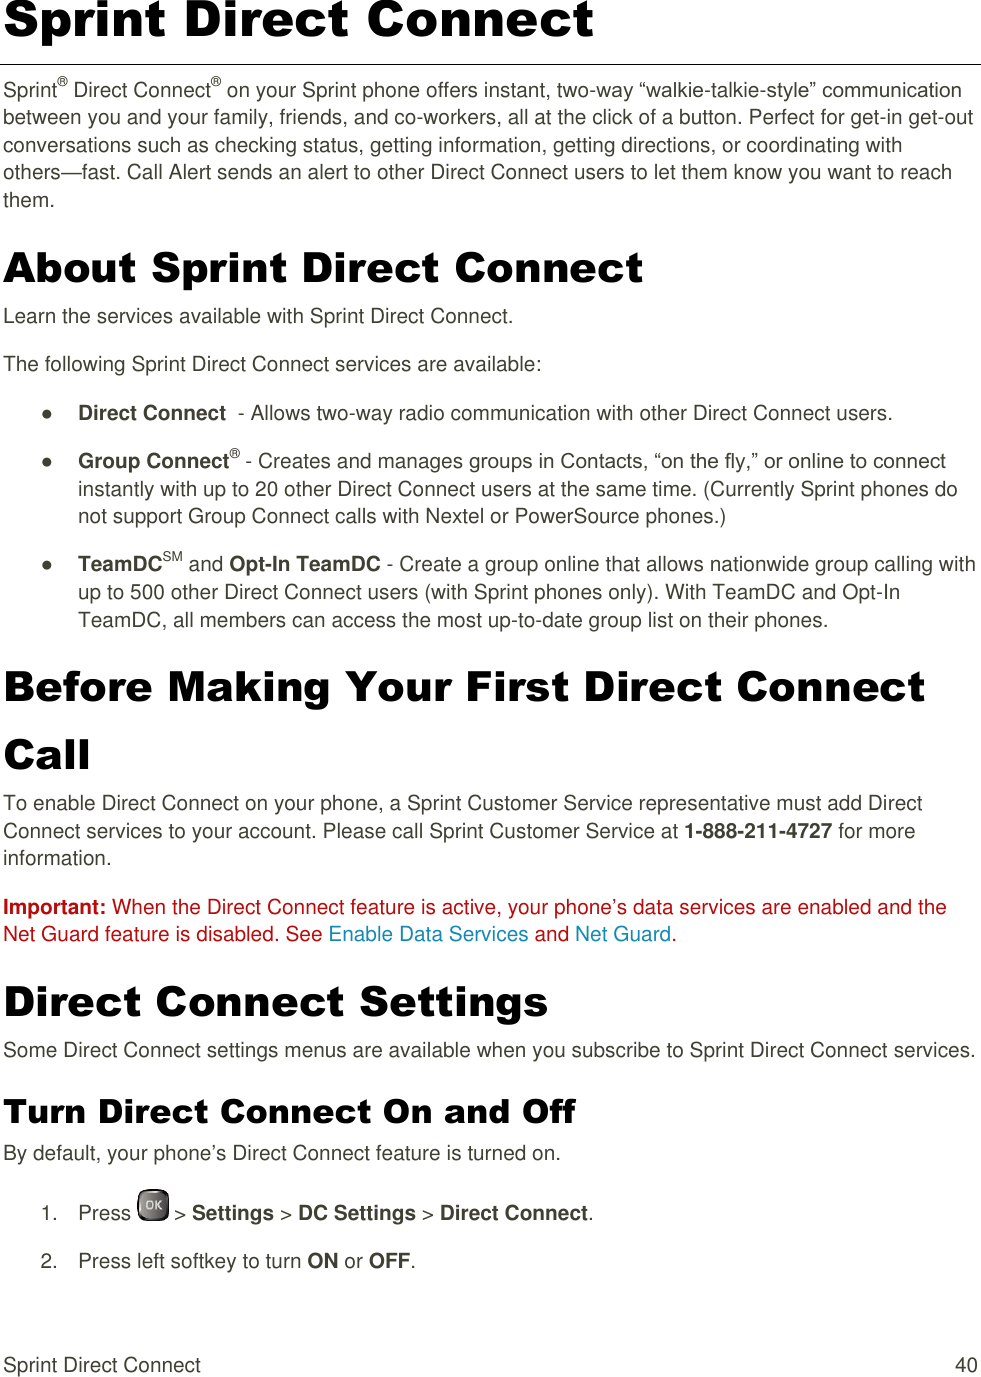  Sprint Direct Connect  40 Sprint Direct Connect Sprint® Direct Connect® on your Sprint phone offers instant, two-way “walkie-talkie-style” communication between you and your family, friends, and co-workers, all at the click of a button. Perfect for get-in get-out conversations such as checking status, getting information, getting directions, or coordinating with others—fast. Call Alert sends an alert to other Direct Connect users to let them know you want to reach them. About Sprint Direct Connect Learn the services available with Sprint Direct Connect. The following Sprint Direct Connect services are available: ● Direct Connect  - Allows two-way radio communication with other Direct Connect users. ● Group Connect® - Creates and manages groups in Contacts, “on the fly,” or online to connect instantly with up to 20 other Direct Connect users at the same time. (Currently Sprint phones do not support Group Connect calls with Nextel or PowerSource phones.) ● TeamDCSM and Opt-In TeamDC - Create a group online that allows nationwide group calling with up to 500 other Direct Connect users (with Sprint phones only). With TeamDC and Opt-In TeamDC, all members can access the most up-to-date group list on their phones. Before Making Your First Direct Connect Call To enable Direct Connect on your phone, a Sprint Customer Service representative must add Direct Connect services to your account. Please call Sprint Customer Service at 1-888-211-4727 for more information. Important: When the Direct Connect feature is active, your phone’s data services are enabled and the Net Guard feature is disabled. See Enable Data Services and Net Guard. Direct Connect Settings Some Direct Connect settings menus are available when you subscribe to Sprint Direct Connect services. Turn Direct Connect On and Off By default, your phone’s Direct Connect feature is turned on. 1.  Press   &gt; Settings &gt; DC Settings &gt; Direct Connect. 2.  Press left softkey to turn ON or OFF. 